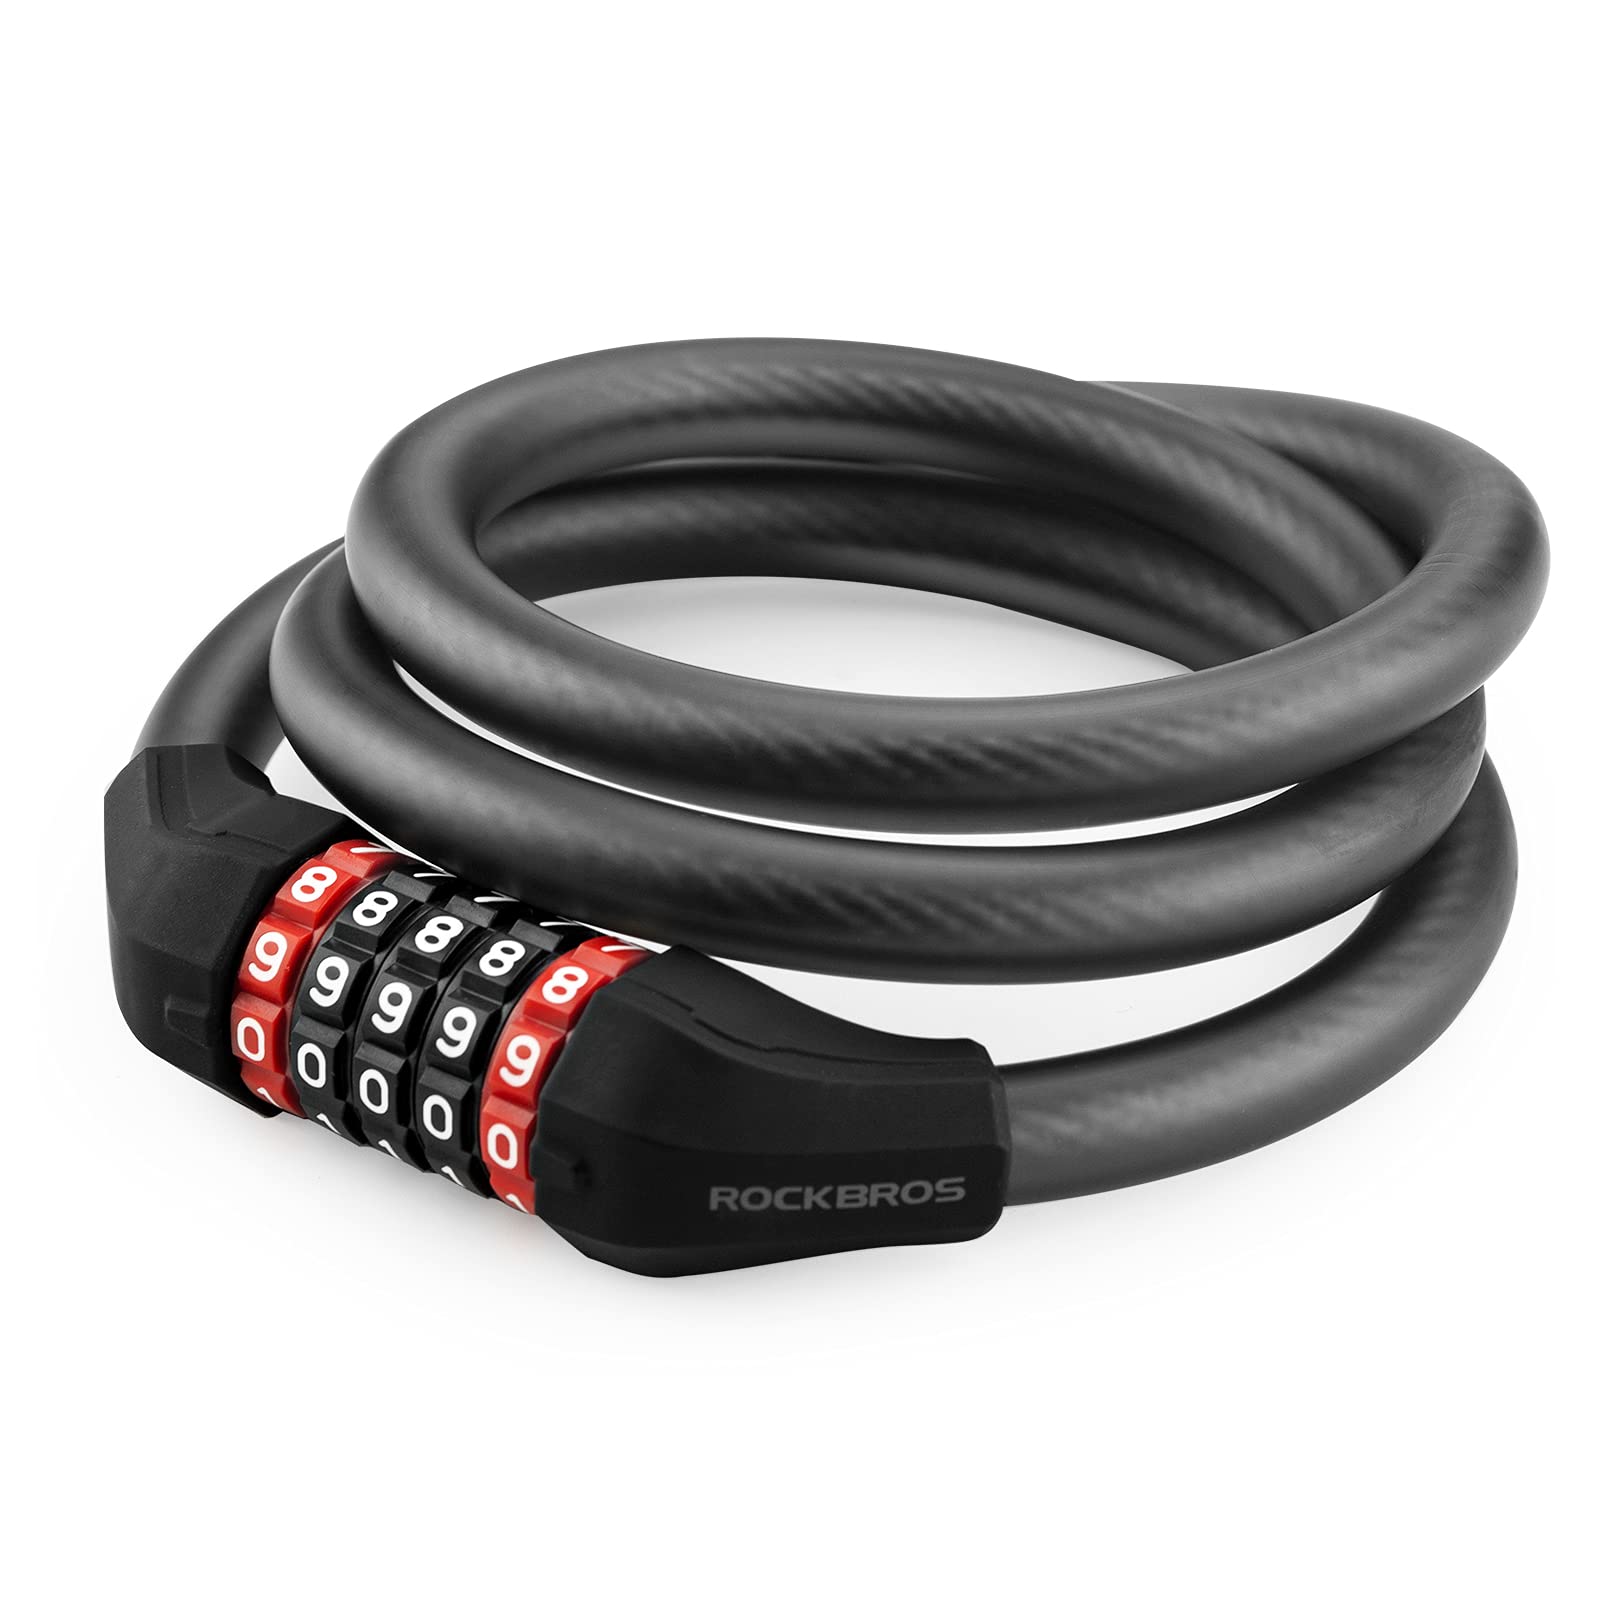 ROCKBROS Bike Lock High Security Combination Cable Lock with 5-Digits Codes #Style_120cm